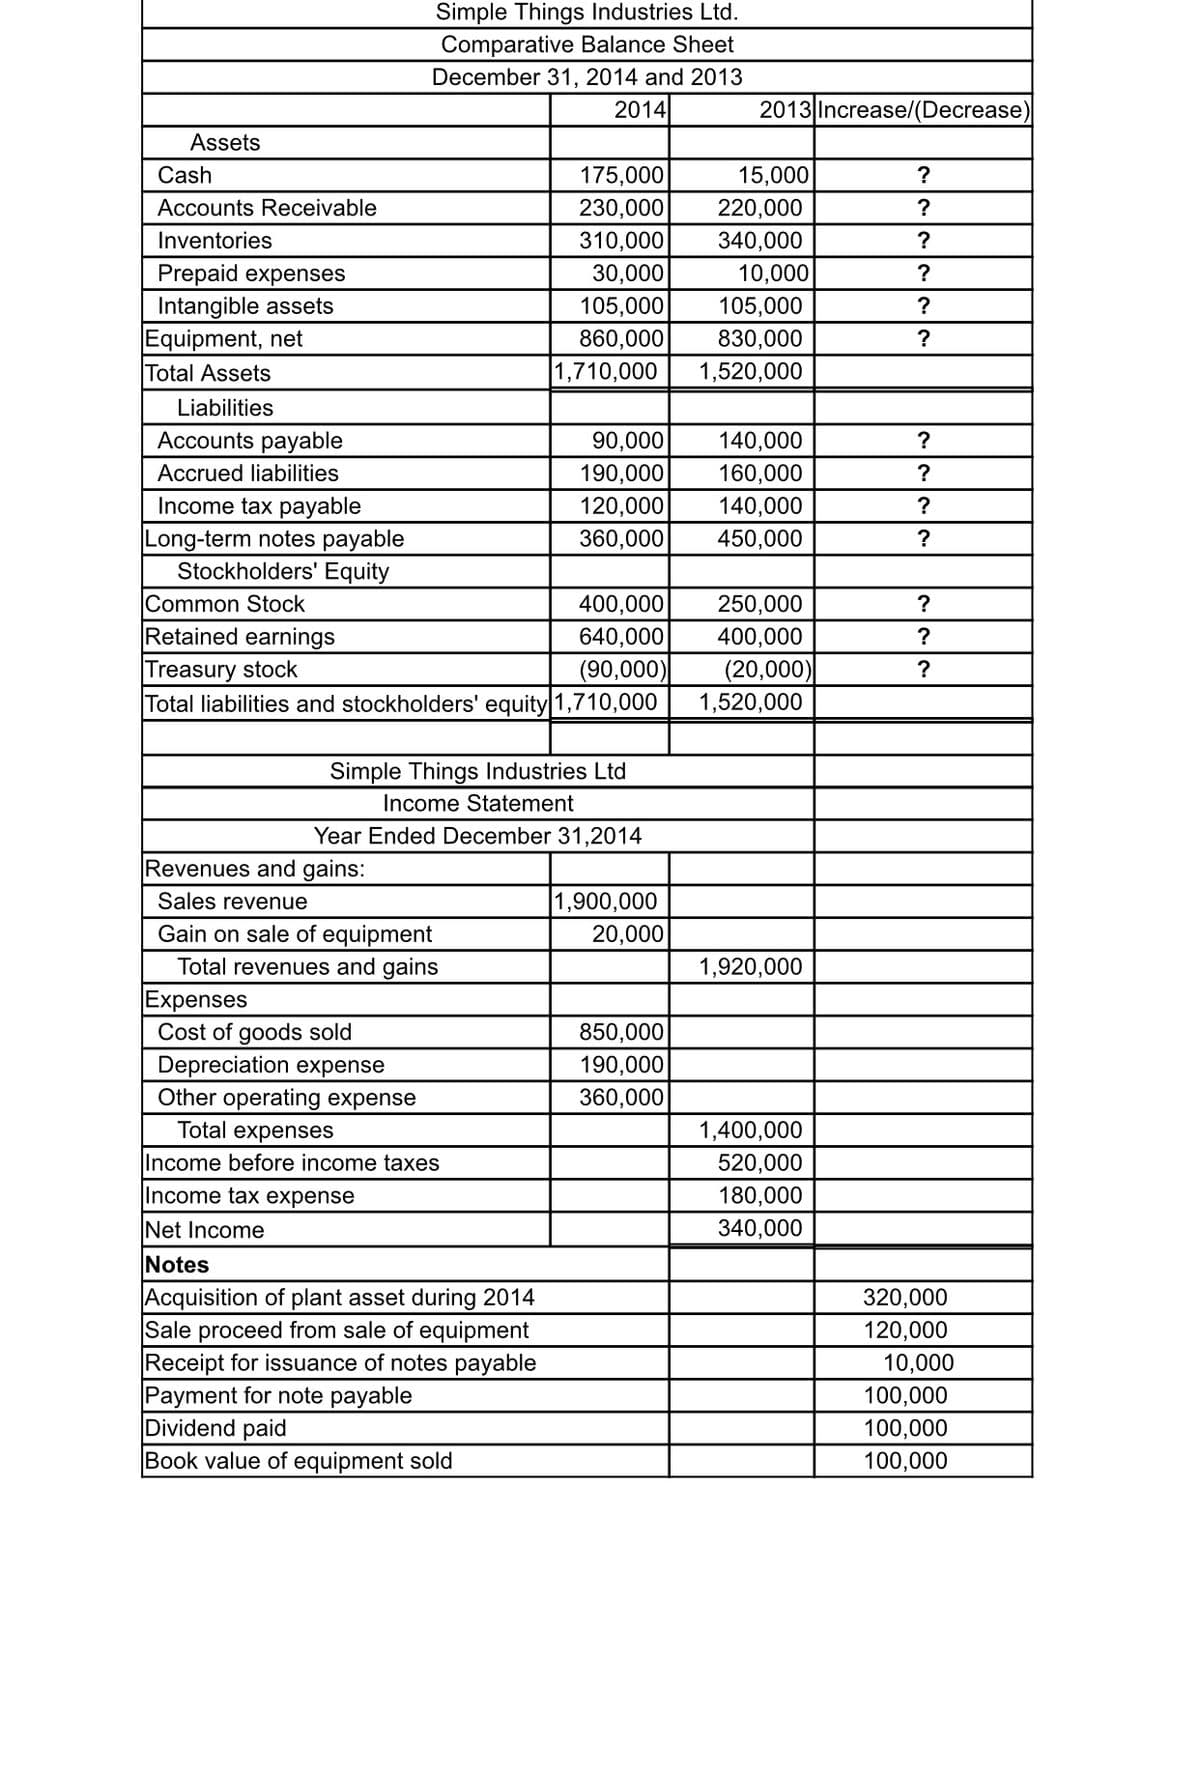 Simple Things Industries Ltd.
Comparative Balance Sheet
December 31, 2014 and 2013
2014
2013 Increase/(Decrease)
Assets
Cash
175,000
15,000
?
Accounts Receivable
230,000
220,000
?
Inventories
310,000
340,000
?
Prepaid expenses
Intangible assets
Equipment, net
Total Assets
30,000
10,000
105,000
860,000
1,710,000
105,000
?
830,000
1,520,000
Liabilities
Accounts payable
90,000
140,000
Accrued liabilities
190,000
160,000
Income tax payable
120,000
140,000
?
Long-term notes payable
Stockholders' Equity
Common Stock
Retained earnings
Treasury stock
Total liabilities and stockholders' equity 1,710,000
360,000
450,000
400,000
250,000
?
640,000
400,000
(90,000)
(20,000)
1,520,000
?
Simple Things Industries Ltd
Income Statement
Year Ended December 31,2014
Revenues and gains:
1,900,000
20,000
Sales revenue
Gain on sale of equipment
Total revenues and gains
1,920,000
Expenses
Cost of goods sold
Depreciation expense
Other operating expense
Total expenses
850,000
190,000
360,000
1,400,000
Income before income taxes
Income tax expense
520,000
180,000
Net Income
Notes
Acquisition of plant asset during 2014
Sale proceed from sale of equipment
Receipt for issuance of notes payable
Payment for note payable
Dividend paid
Book value of equipment sold
340,000
320,000
120,000
10,000
100,000
100,000
100,000
